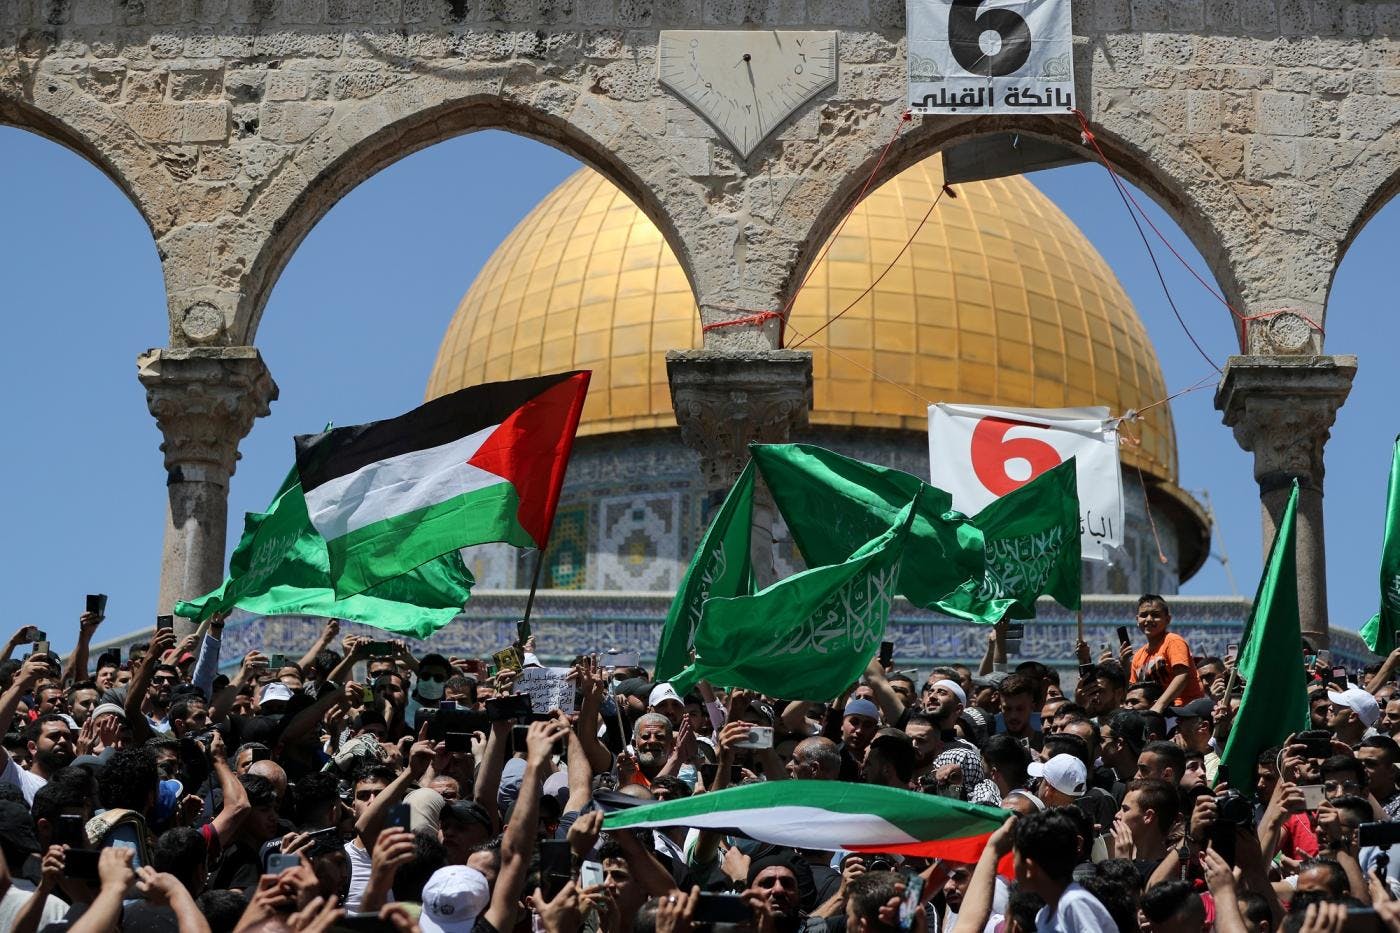 Palestinians are fighting back and they need our solidarity